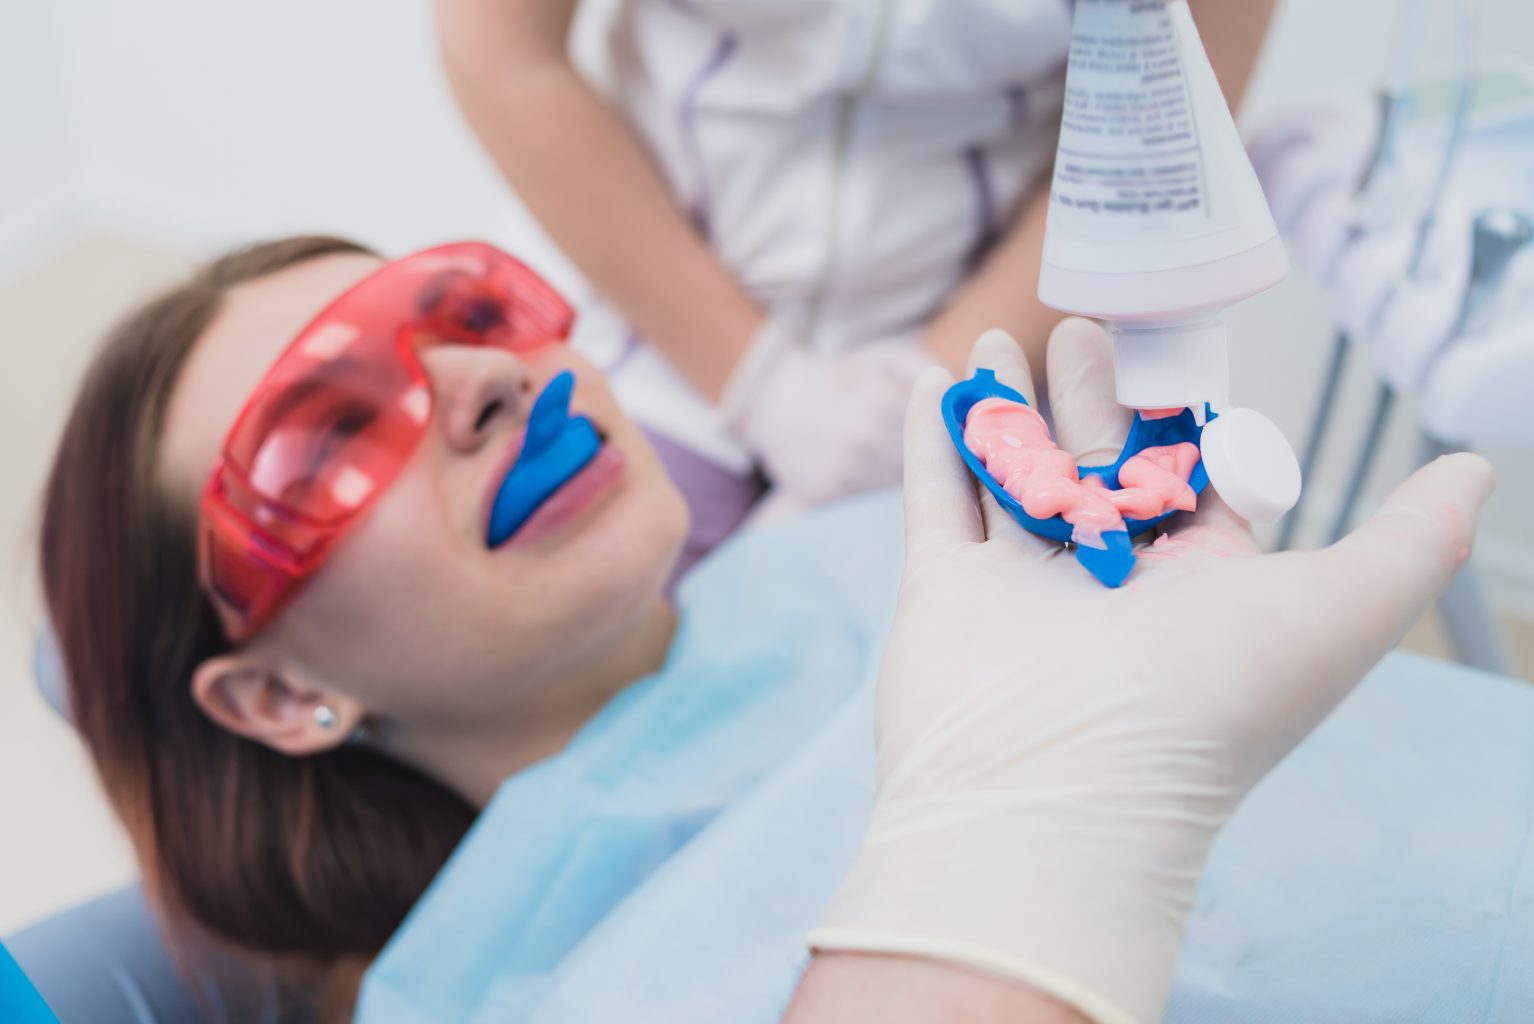 Doctor Orthodontist Performs A Procedure For Cleaning Teeth